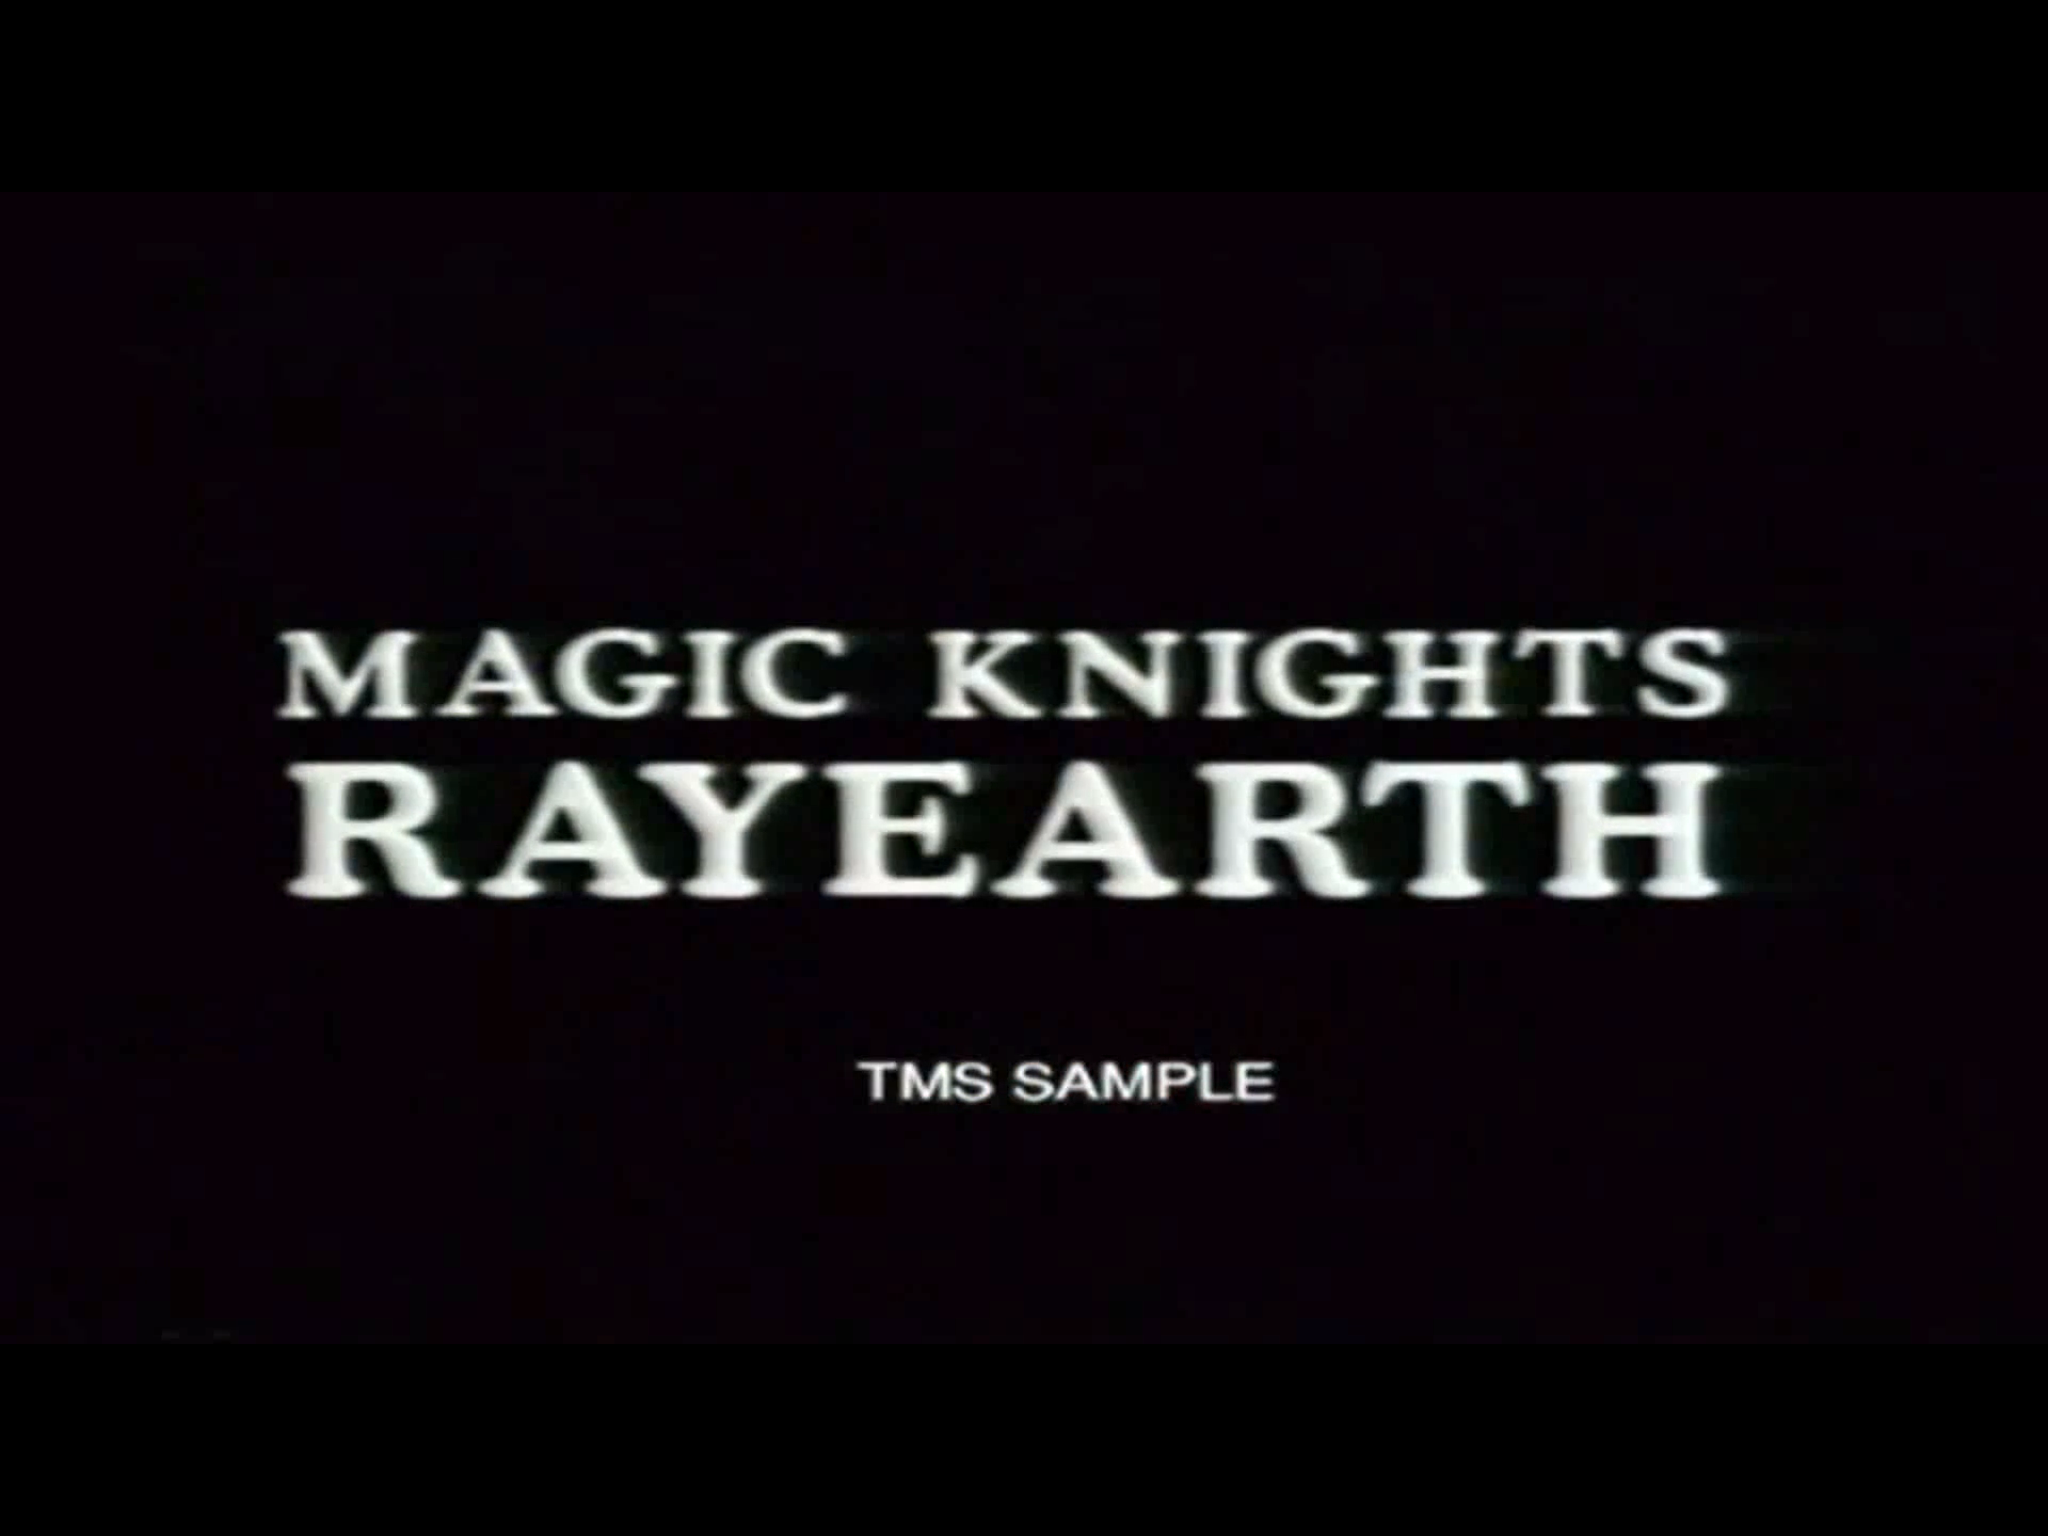 Magic knights rayearth tms.png